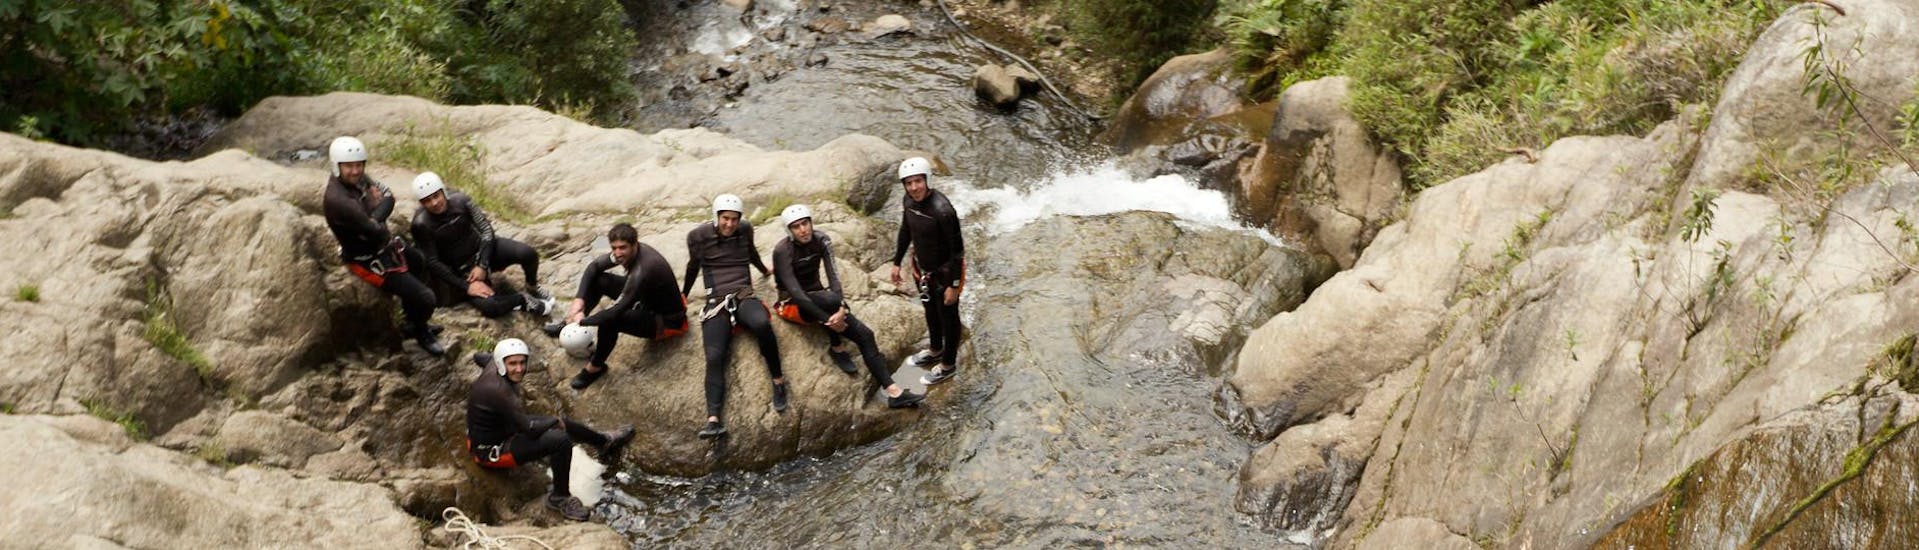 Group of friends having a great time celebrating a bachelor party doing Rafting and Canyoning.